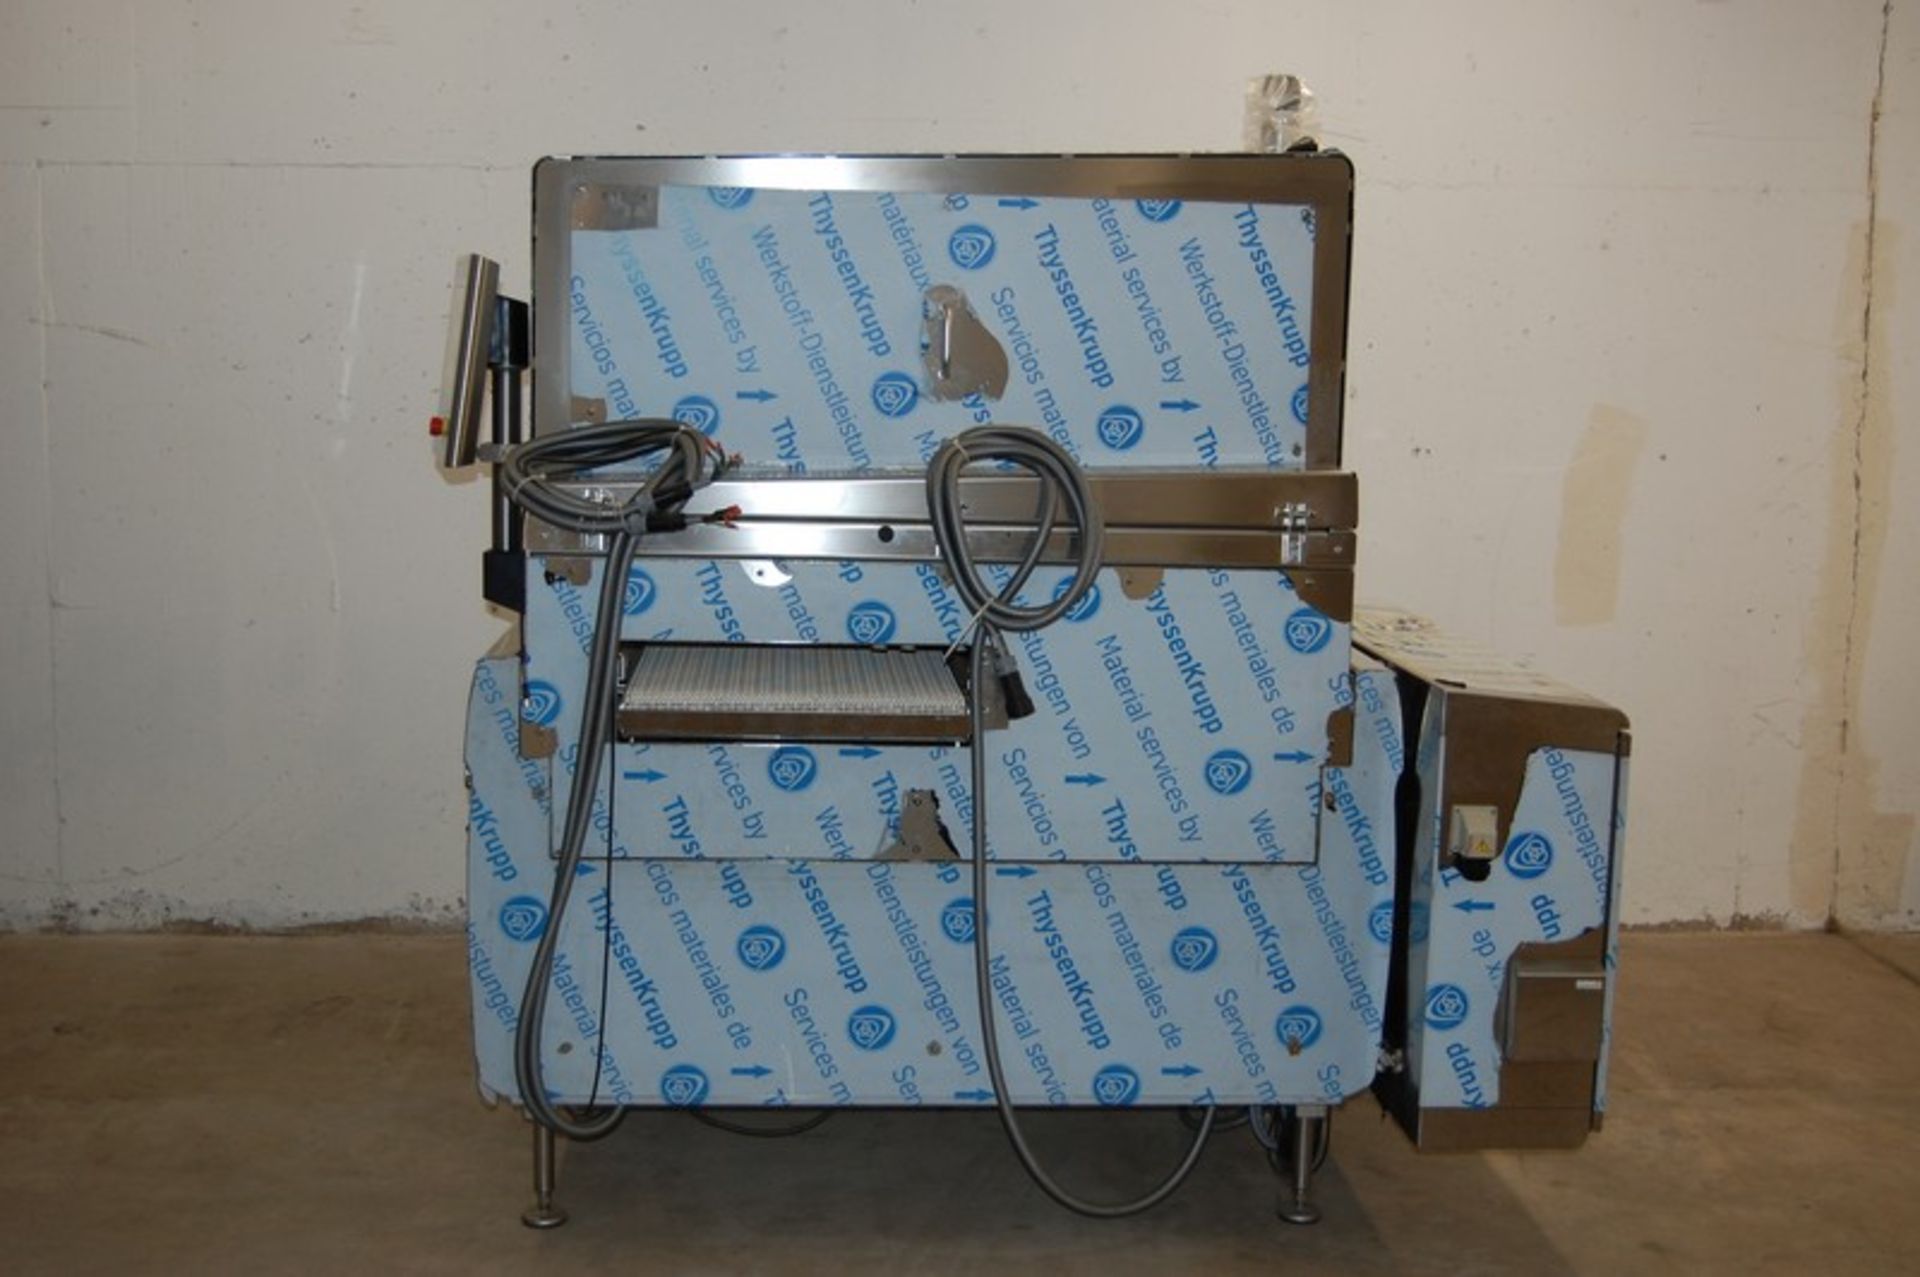 NEW 2012 MultiVac Vacuum Packager, Type: H050, S/N 158612, 208/120 Volts (LOCATED IN BELTSVILLE, MD) - Image 11 of 14